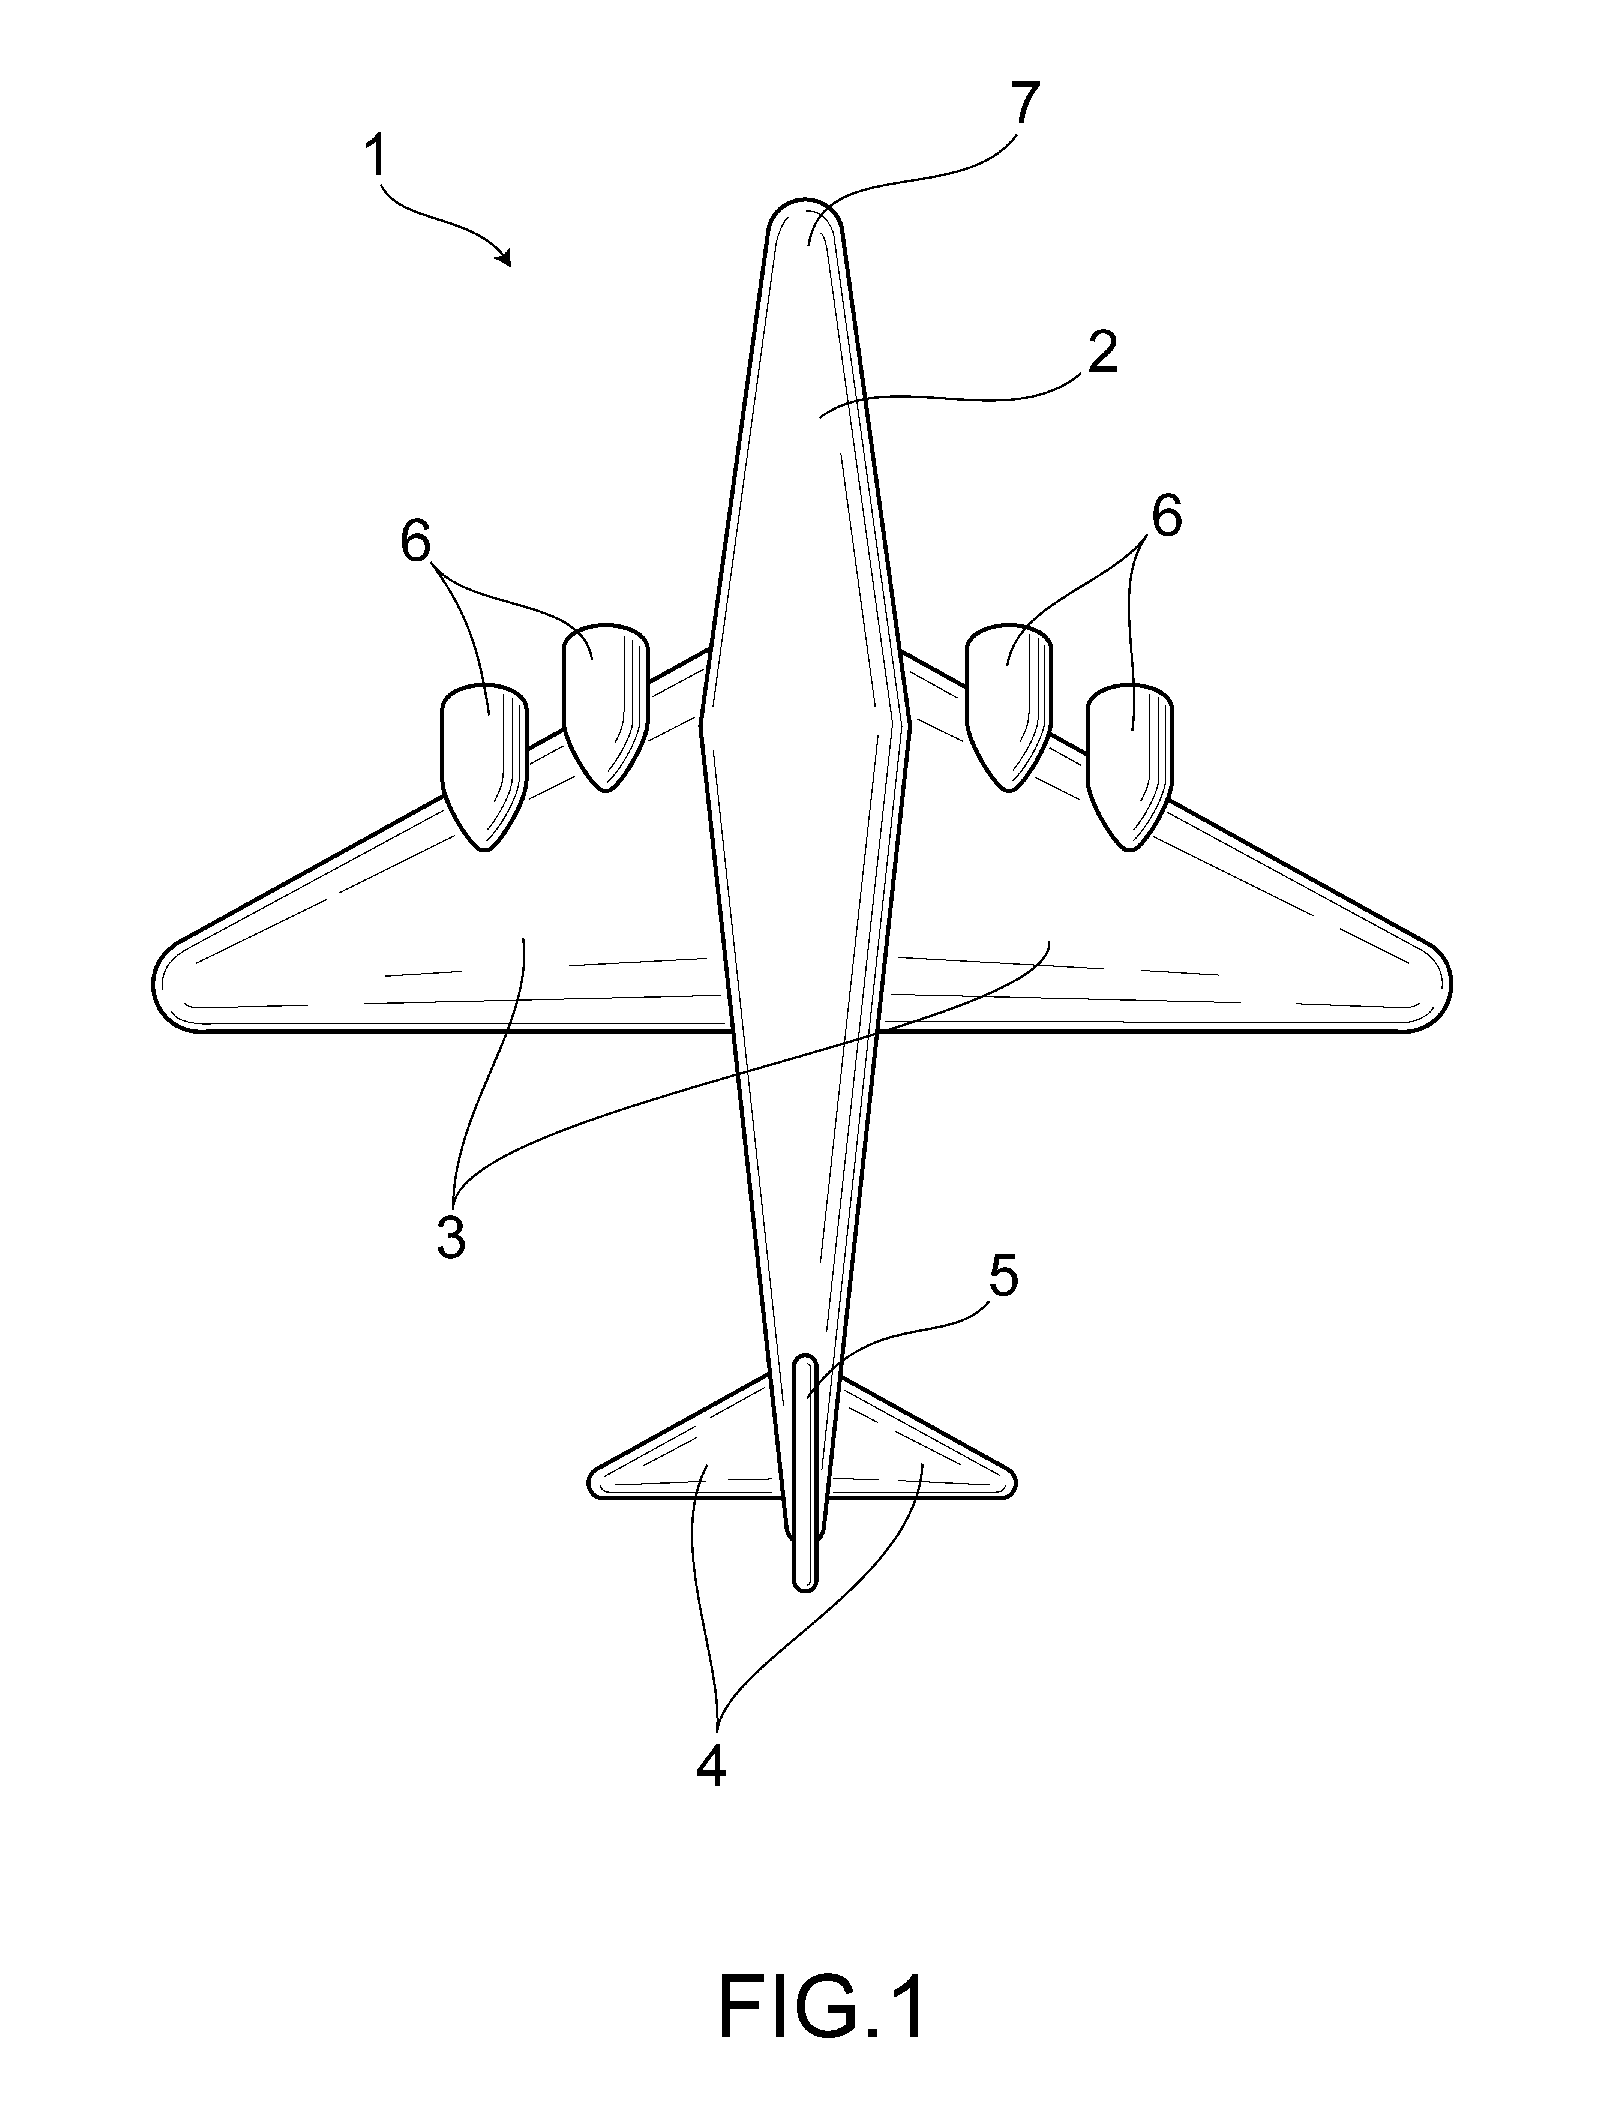 Method of flying an aircraft